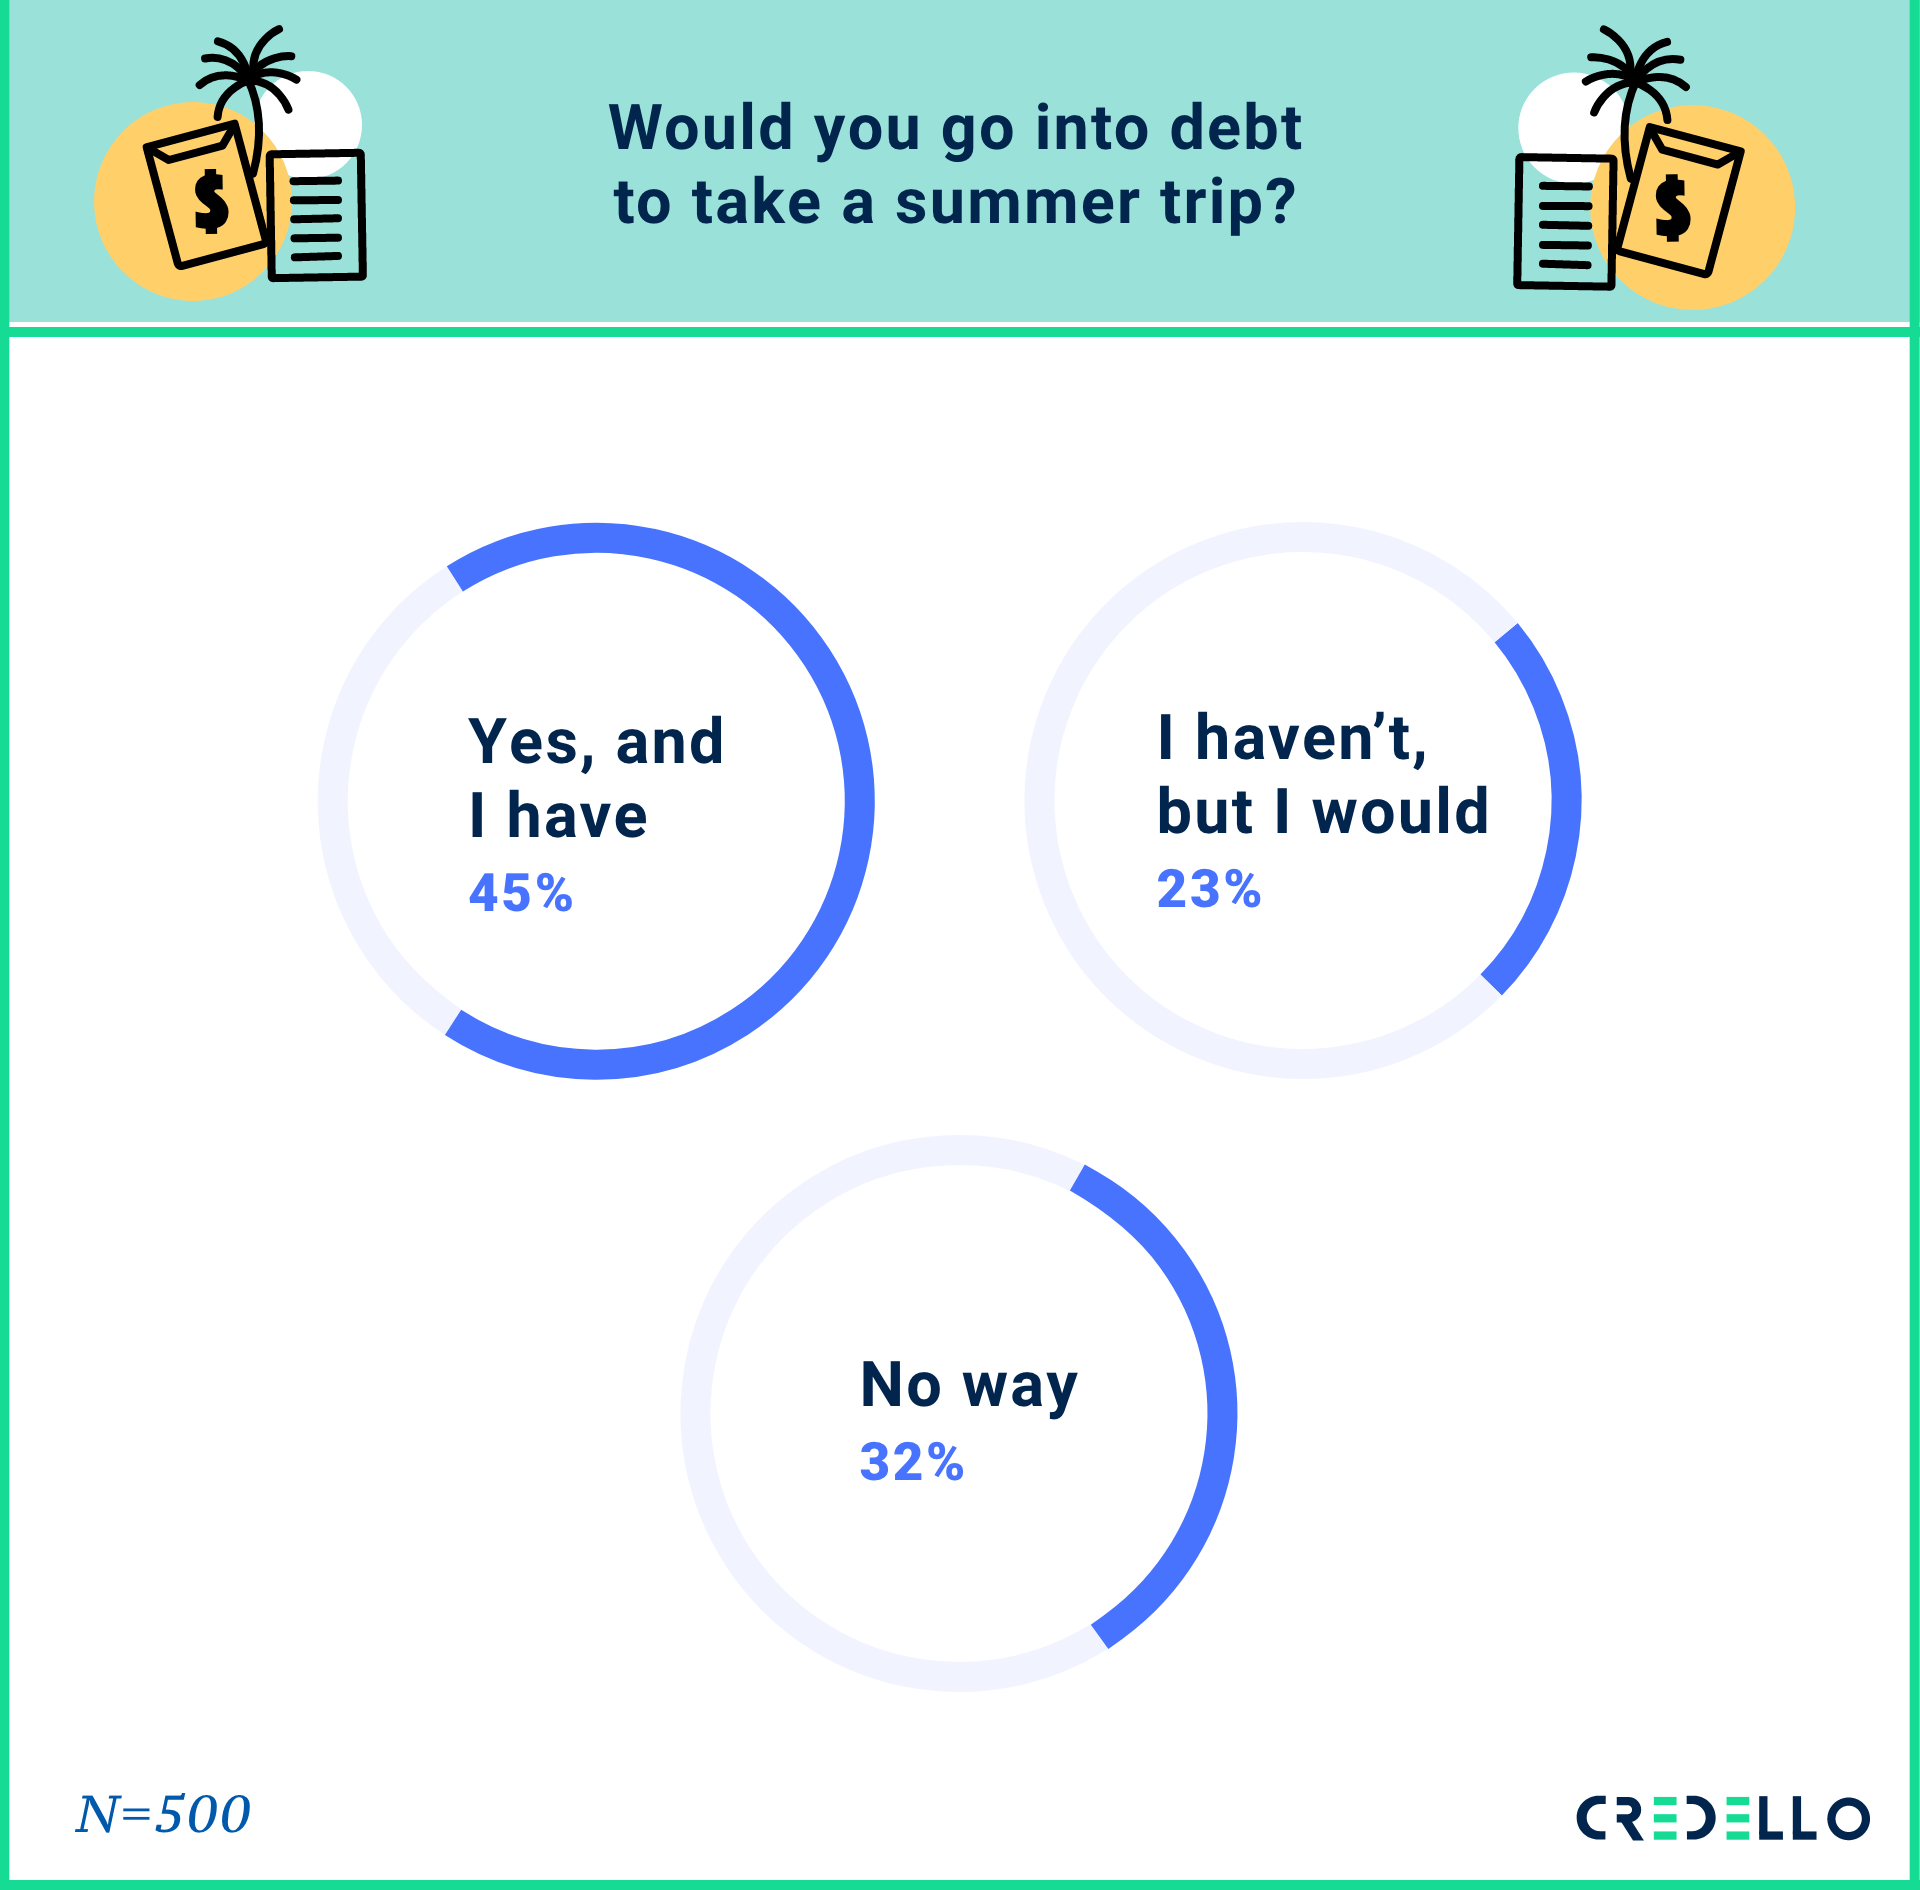 would you go into debt to take a summer trip?